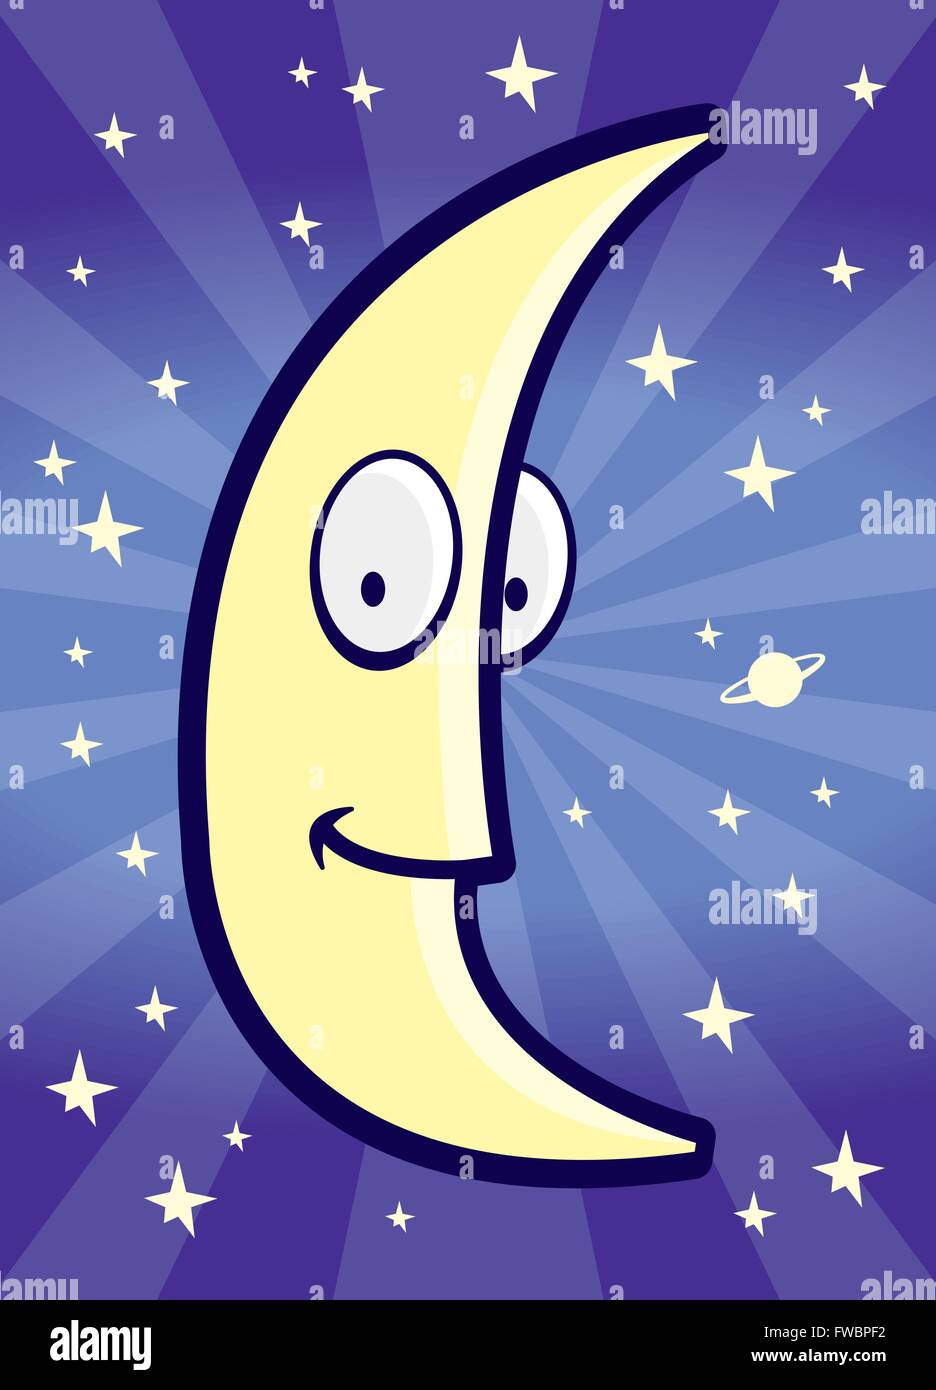 A cartoon moon smiling in the night sky. Stock Vector